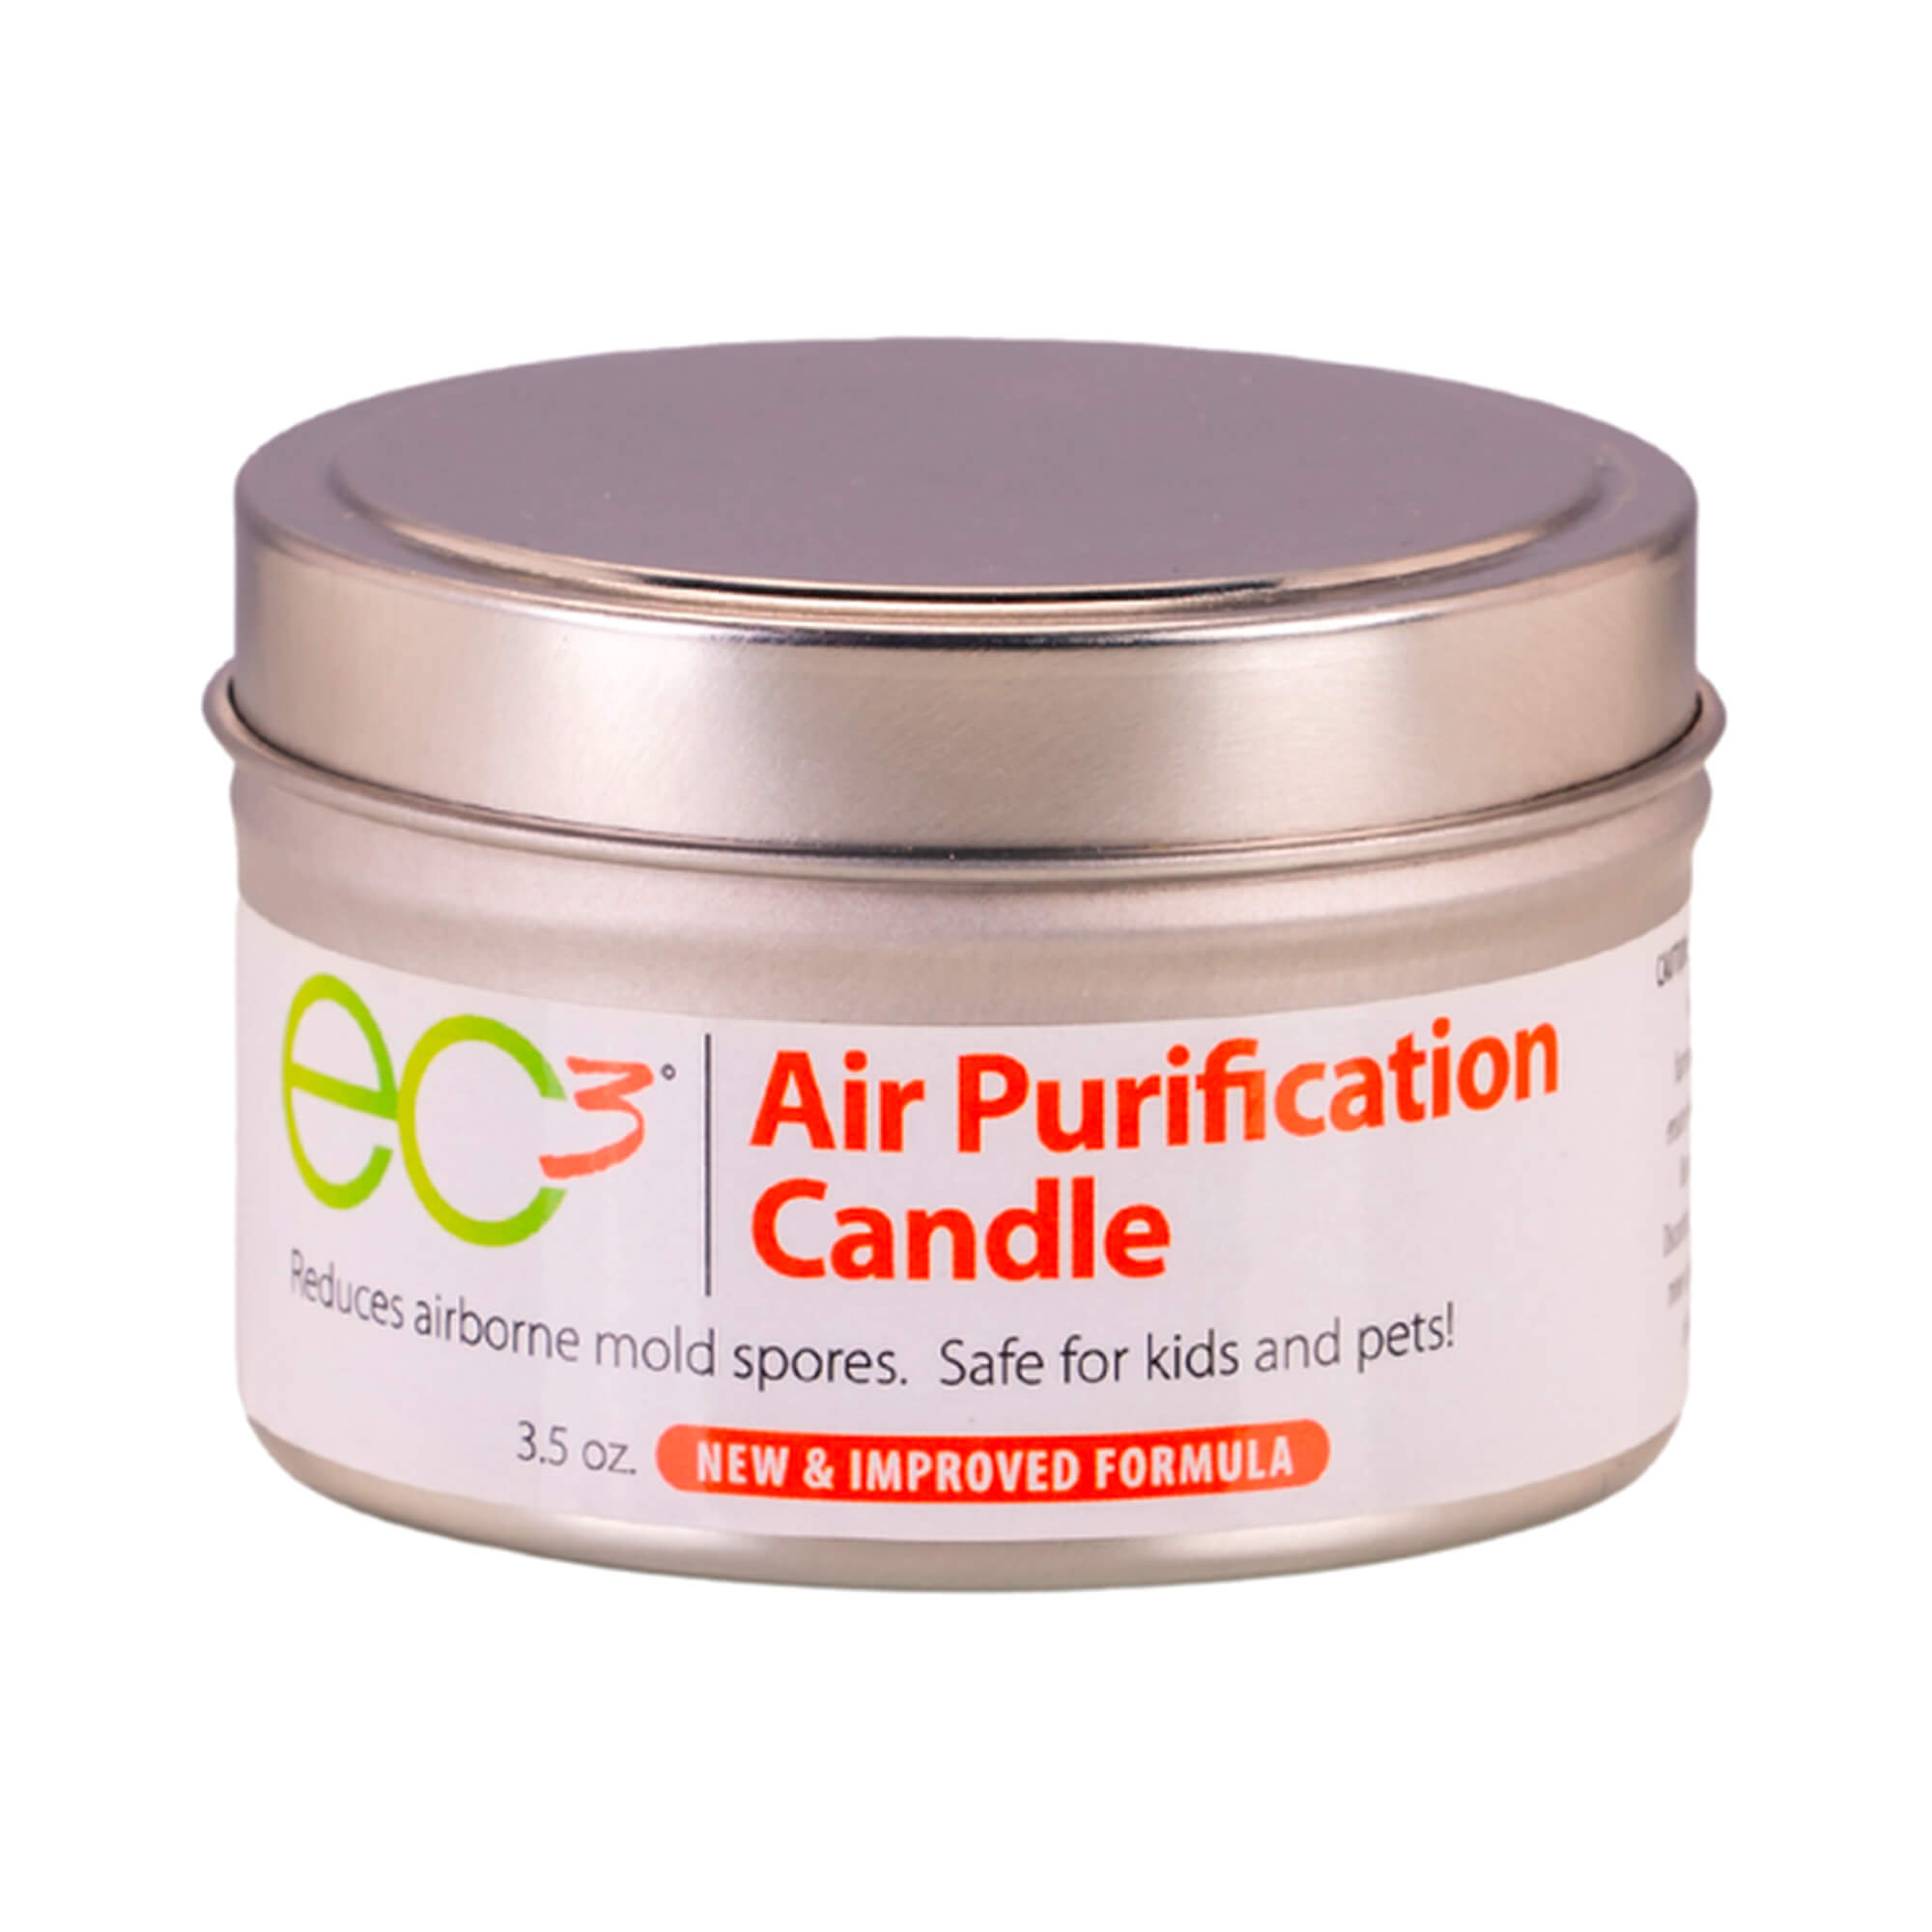 EC3 Air Purification Candle Natural Botanical Ingredients in Soy Wax